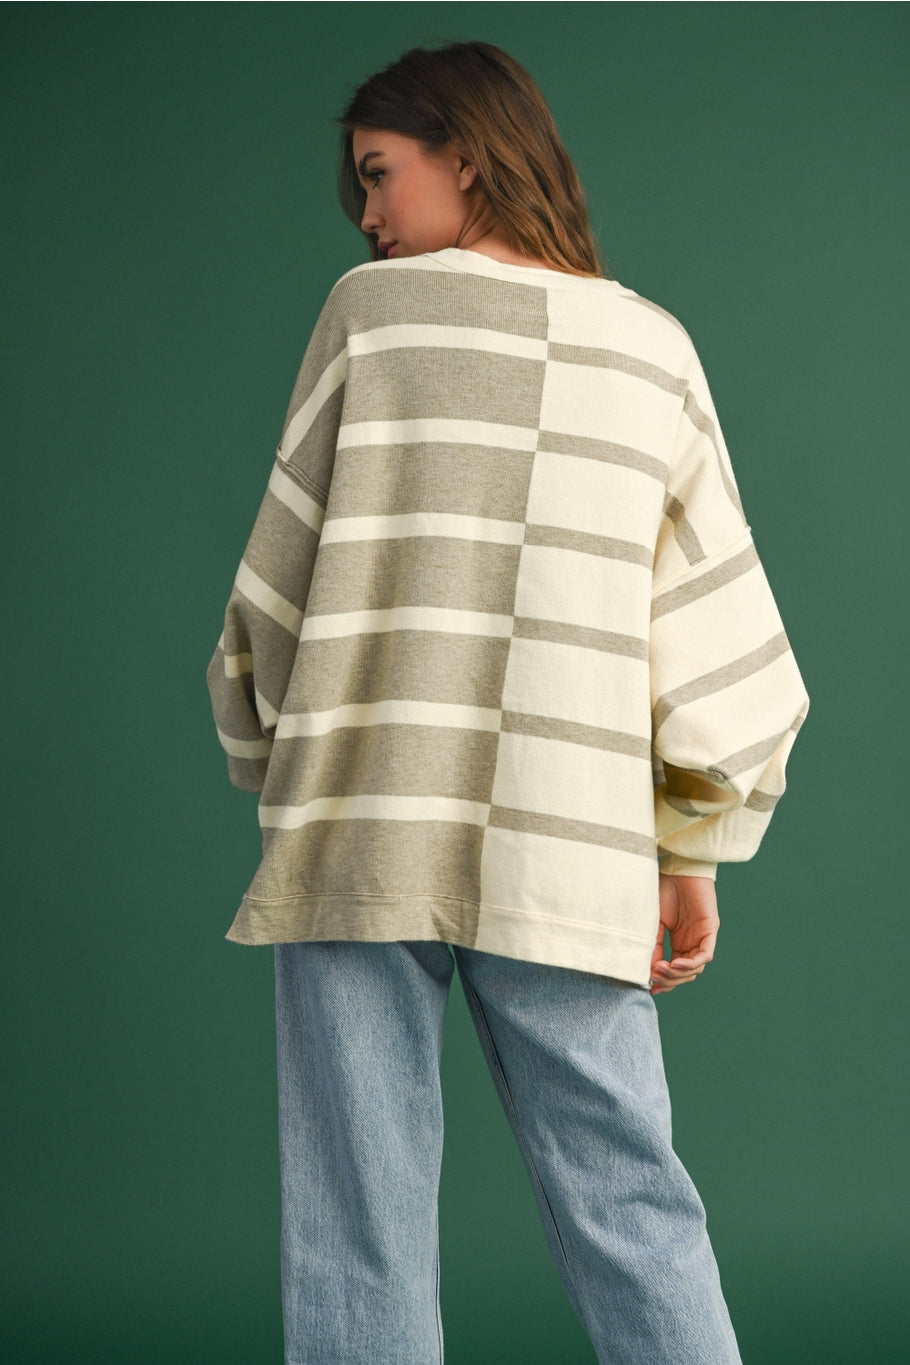 The Double Stripe Sweater